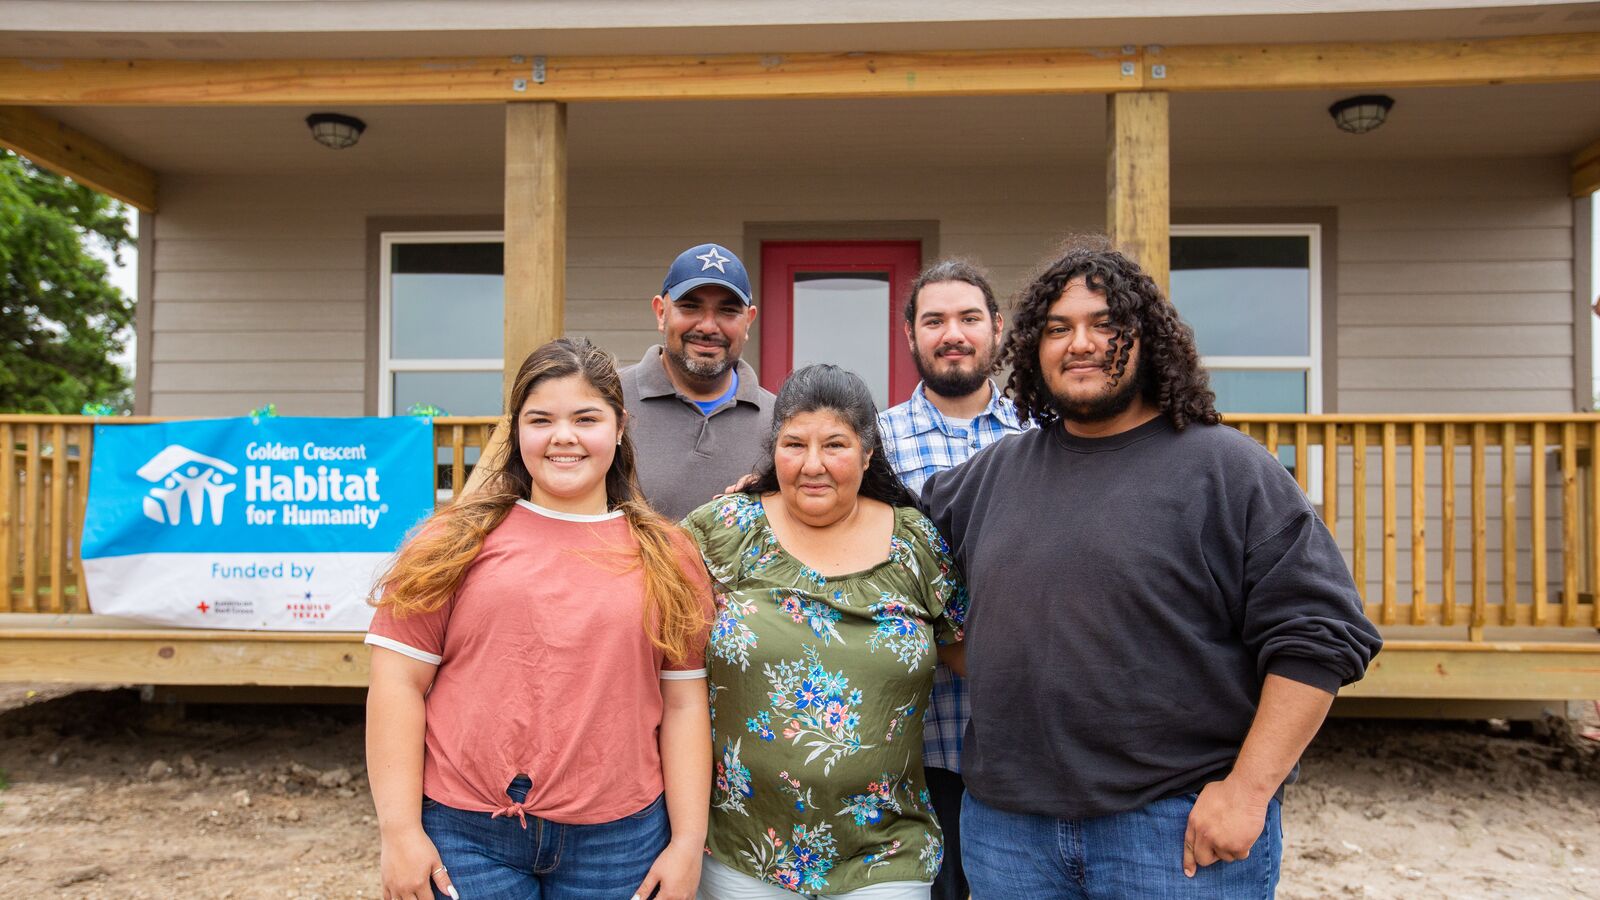 Alice Silvas, her granddaughter Clarissa, and their family in front of their home built by Golden Crescent Habitat for Humanity.